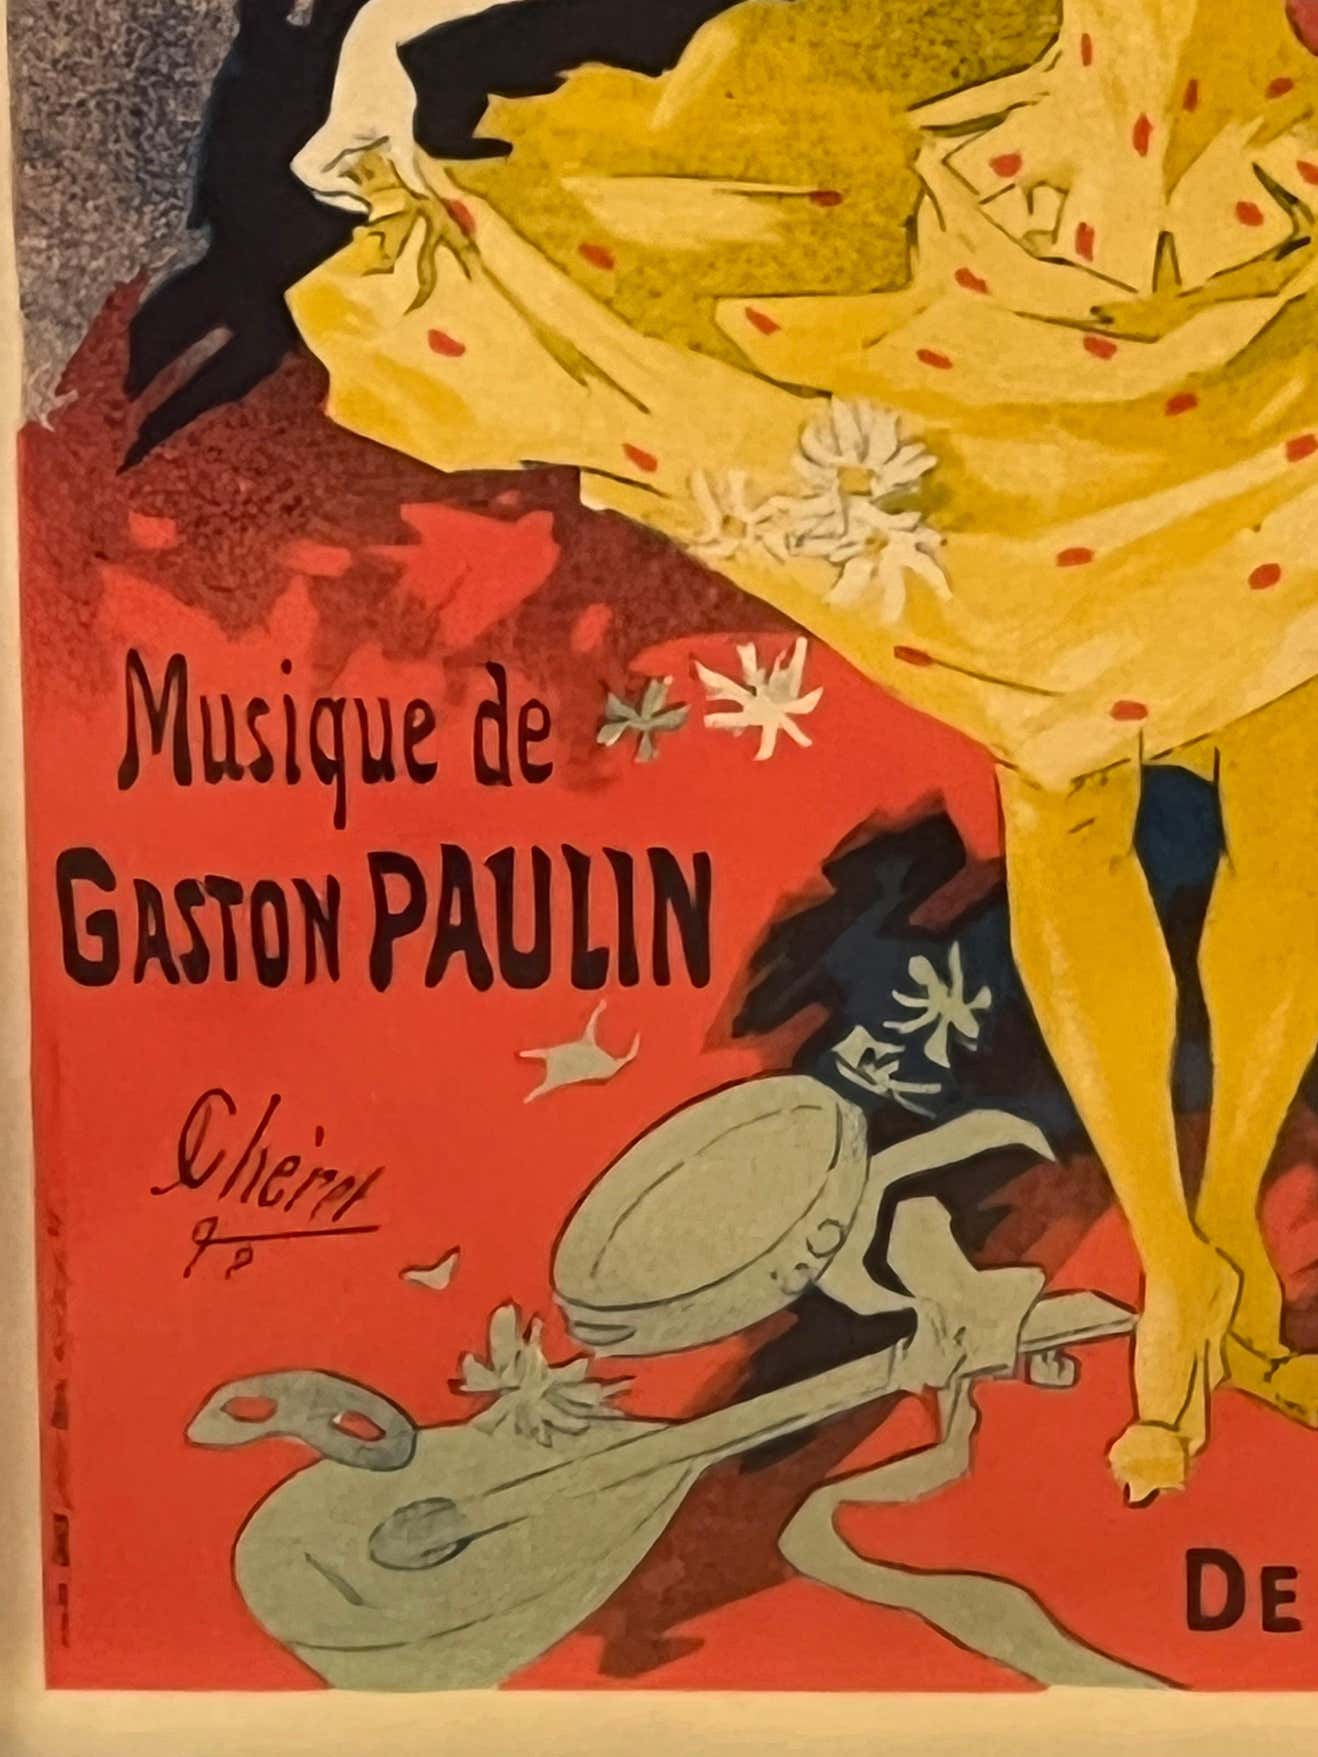 Muse Grevin - Pantomimes Lumineuses" Original Poster by Jules Cheret